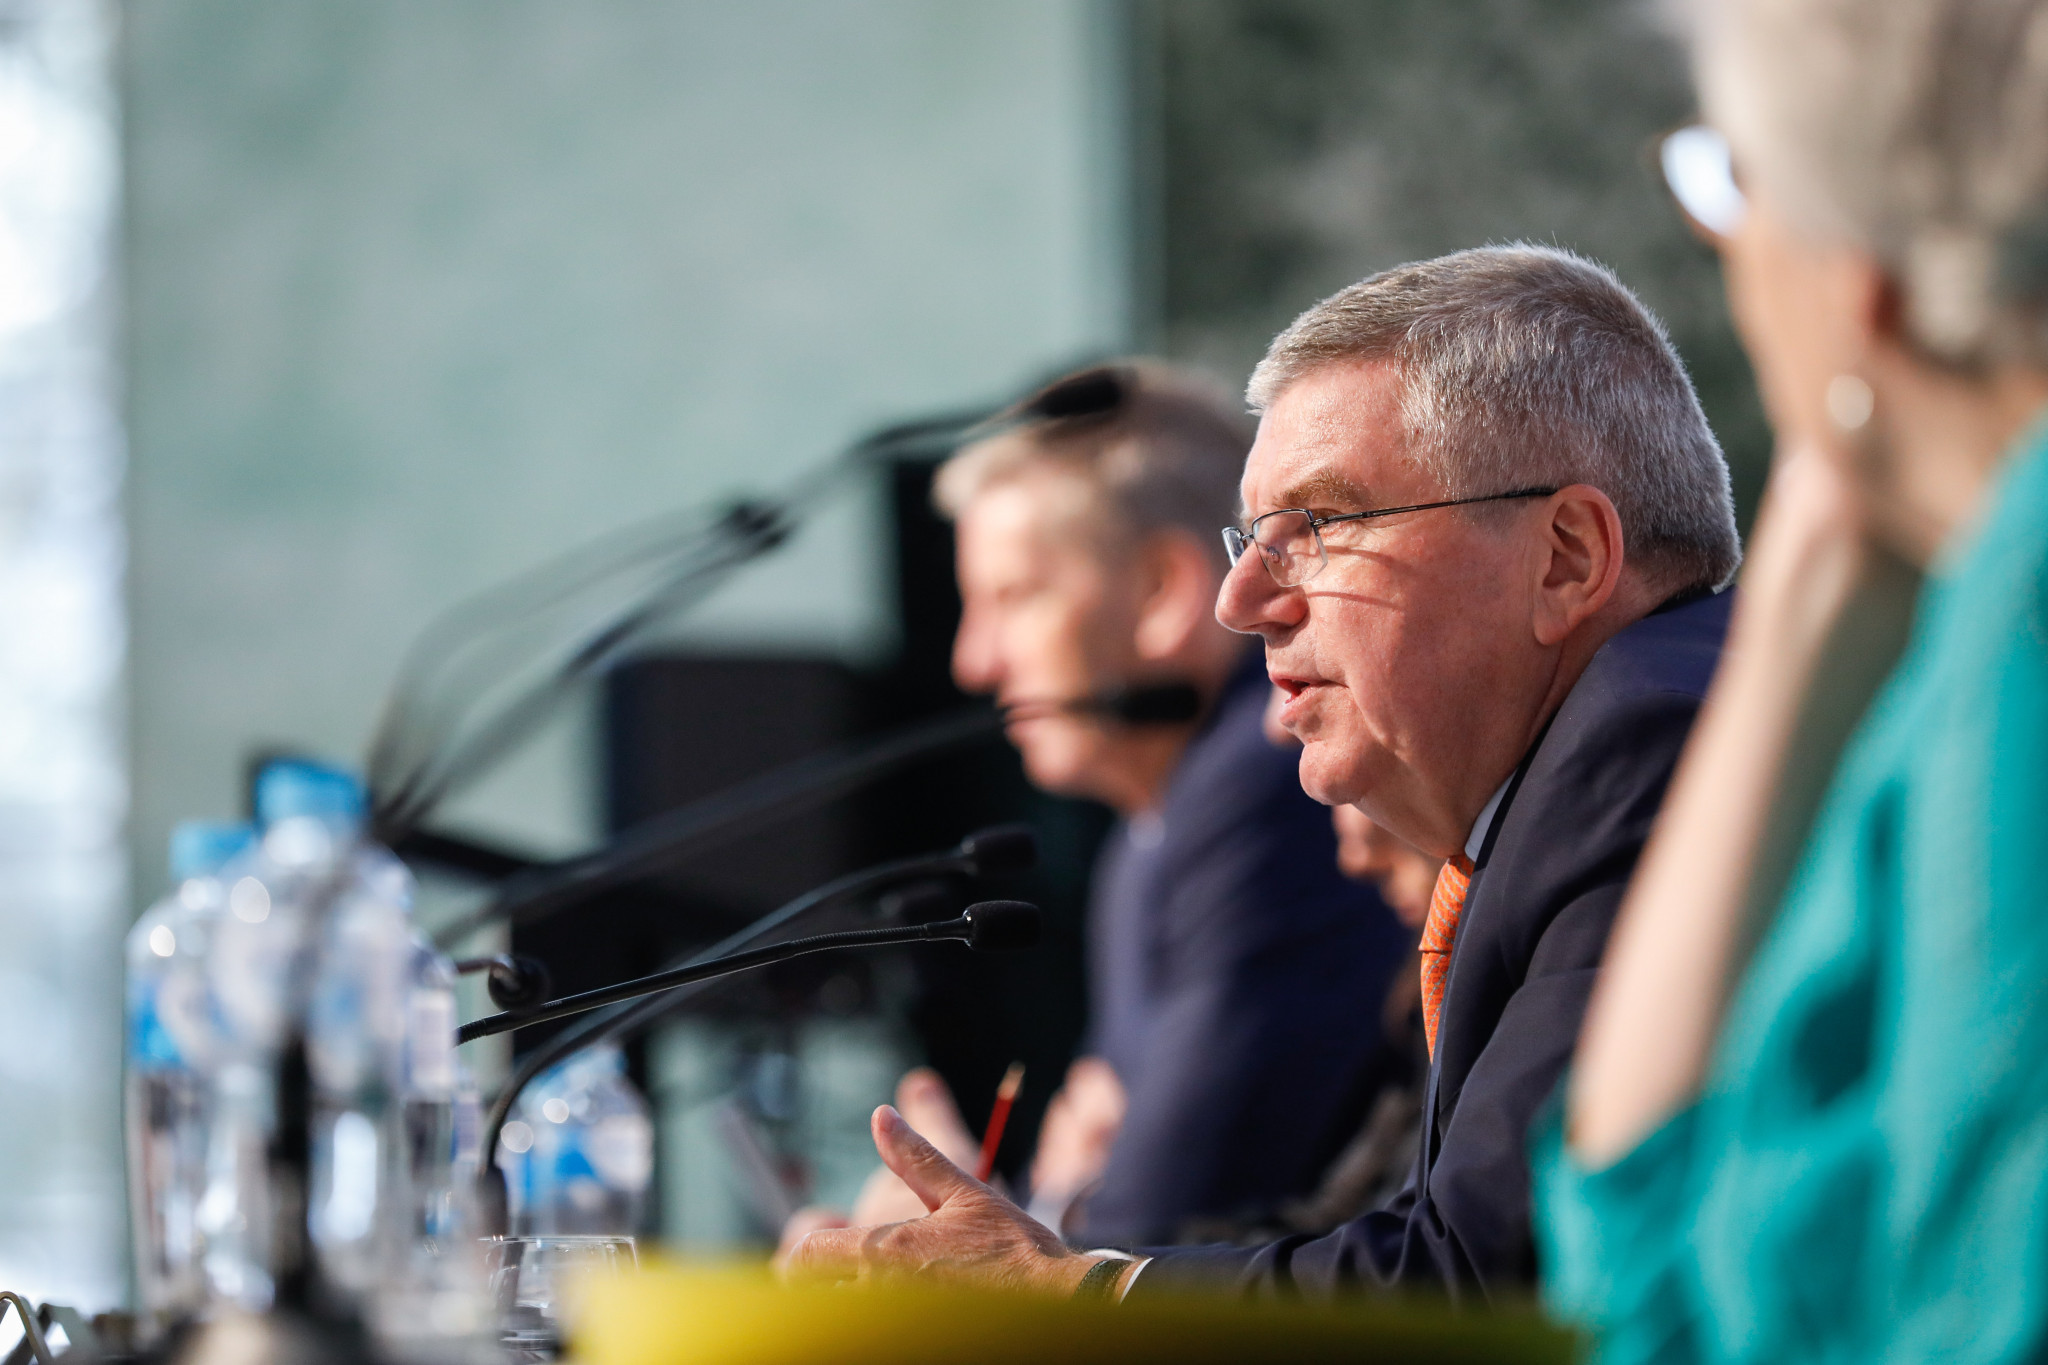 International Olympic Committee President Thomas Bach responds to questions from the media during the Australian Olympic Committee Annual General Meeting in Sydney ©Getty Images